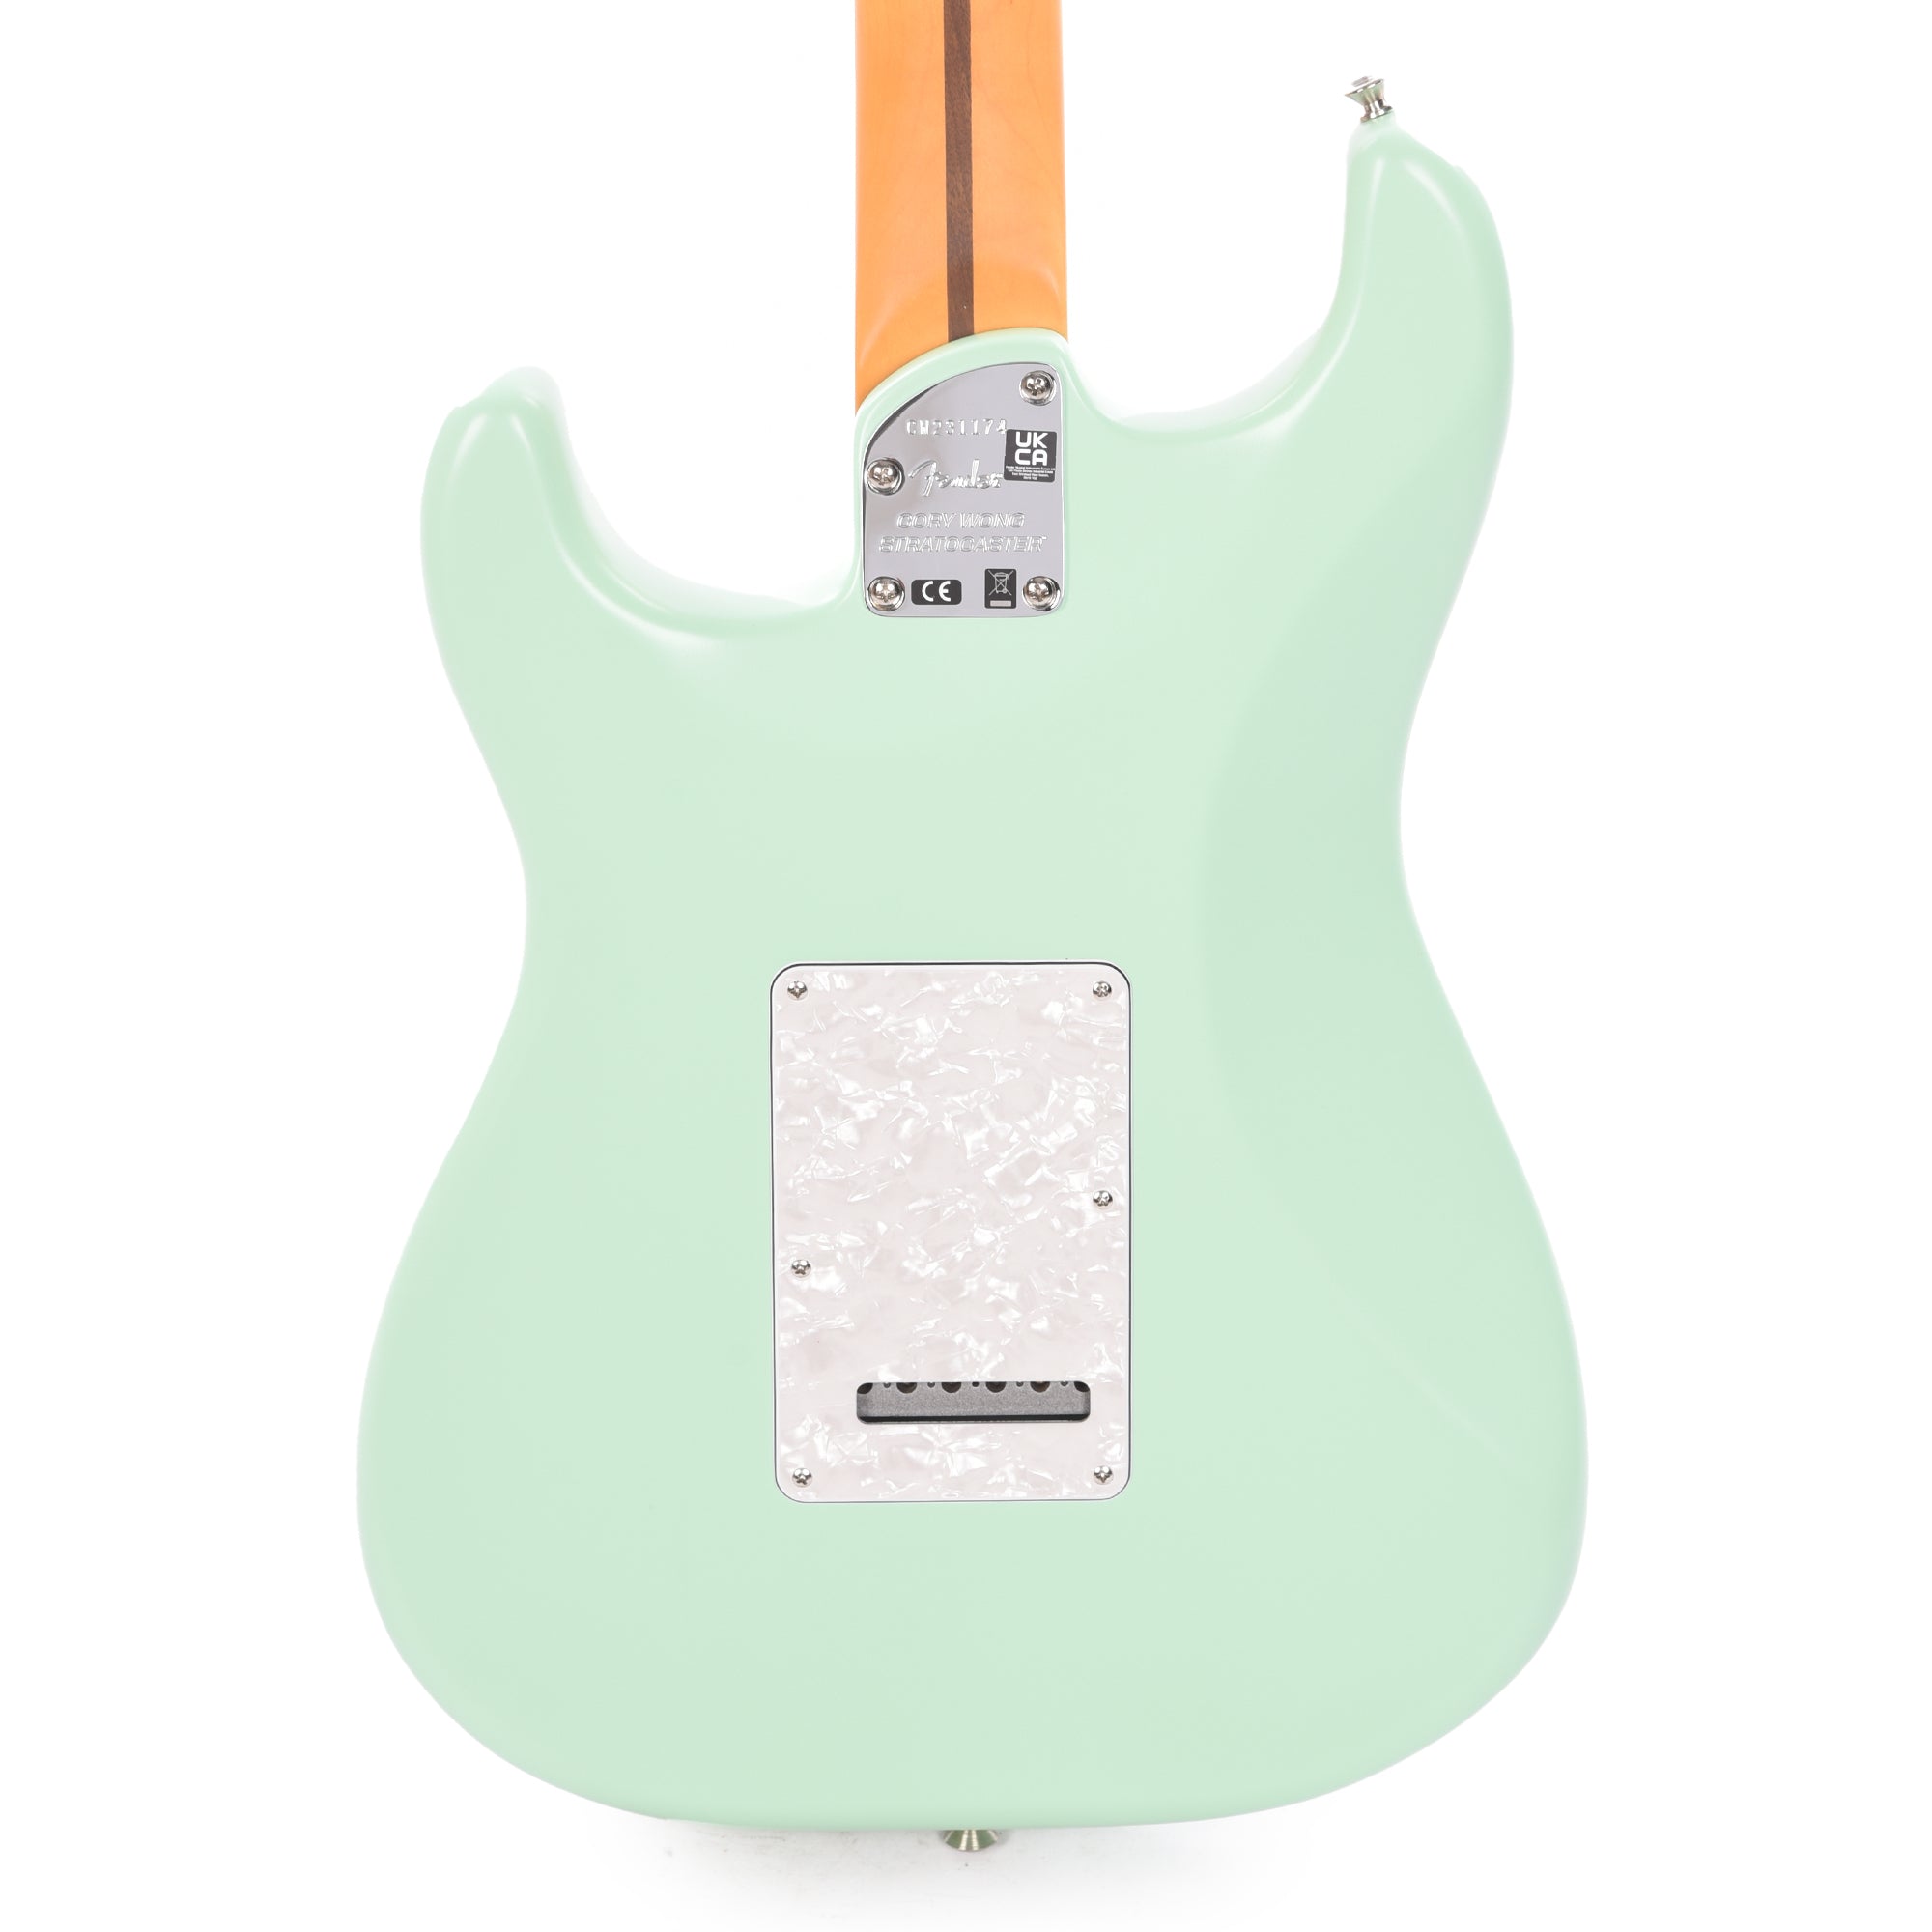 Fender Artist Limited Edition Cory Wong Stratocaster Satin Surf Green